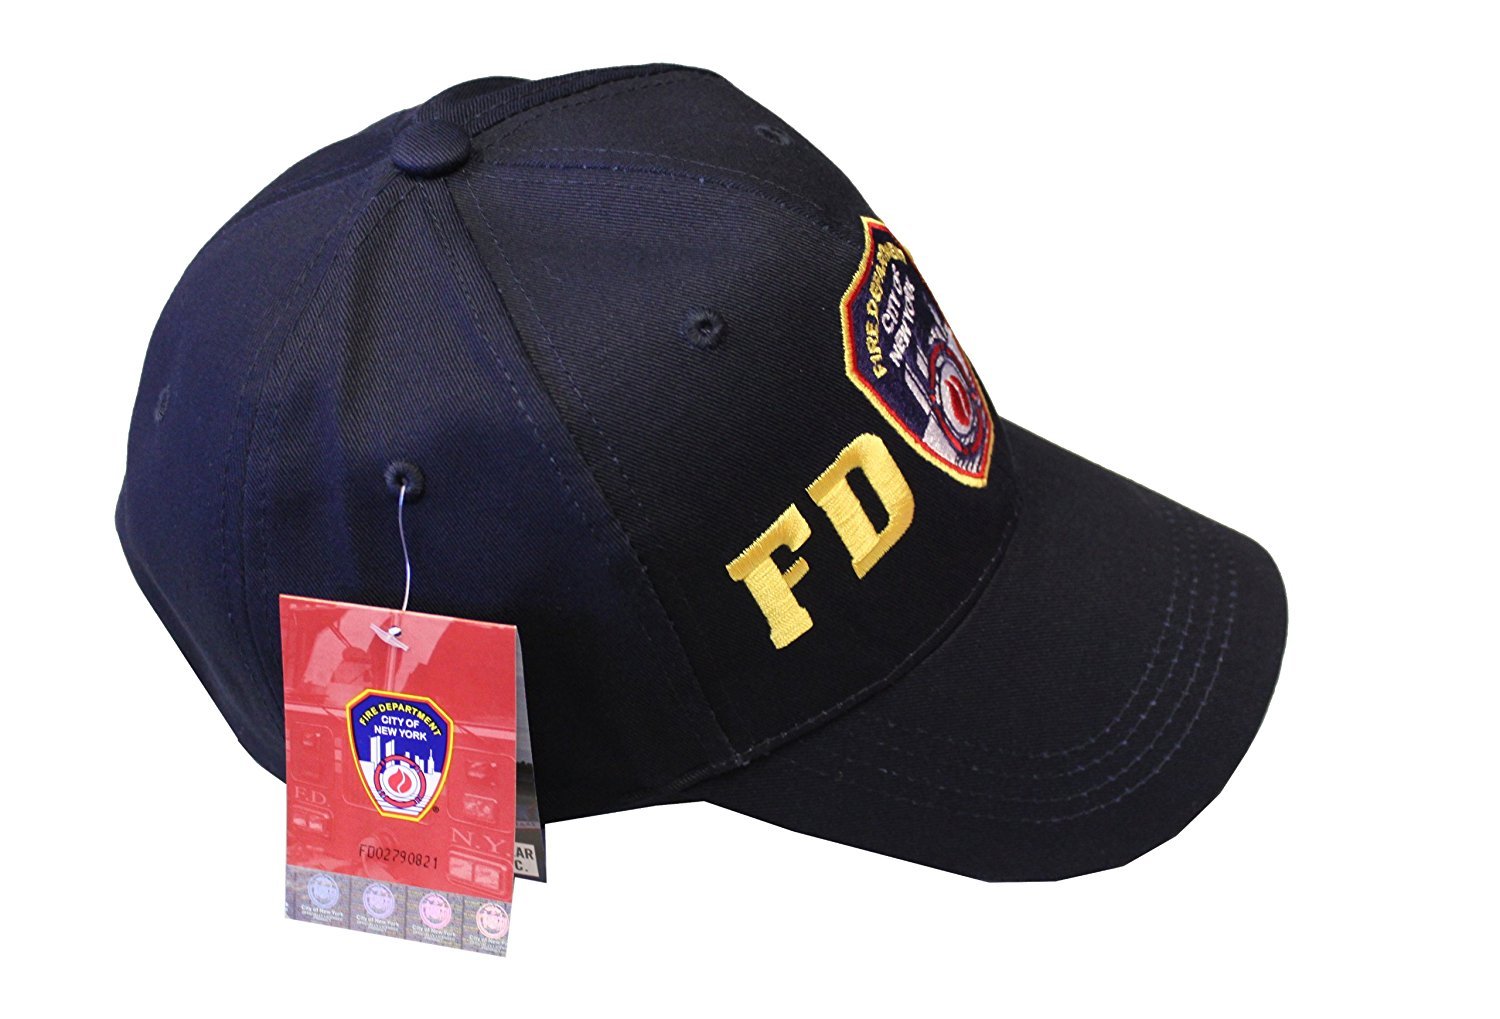 FDNY Junior Kids Baseball Hat Fire Department of New York Navy Blue One Size